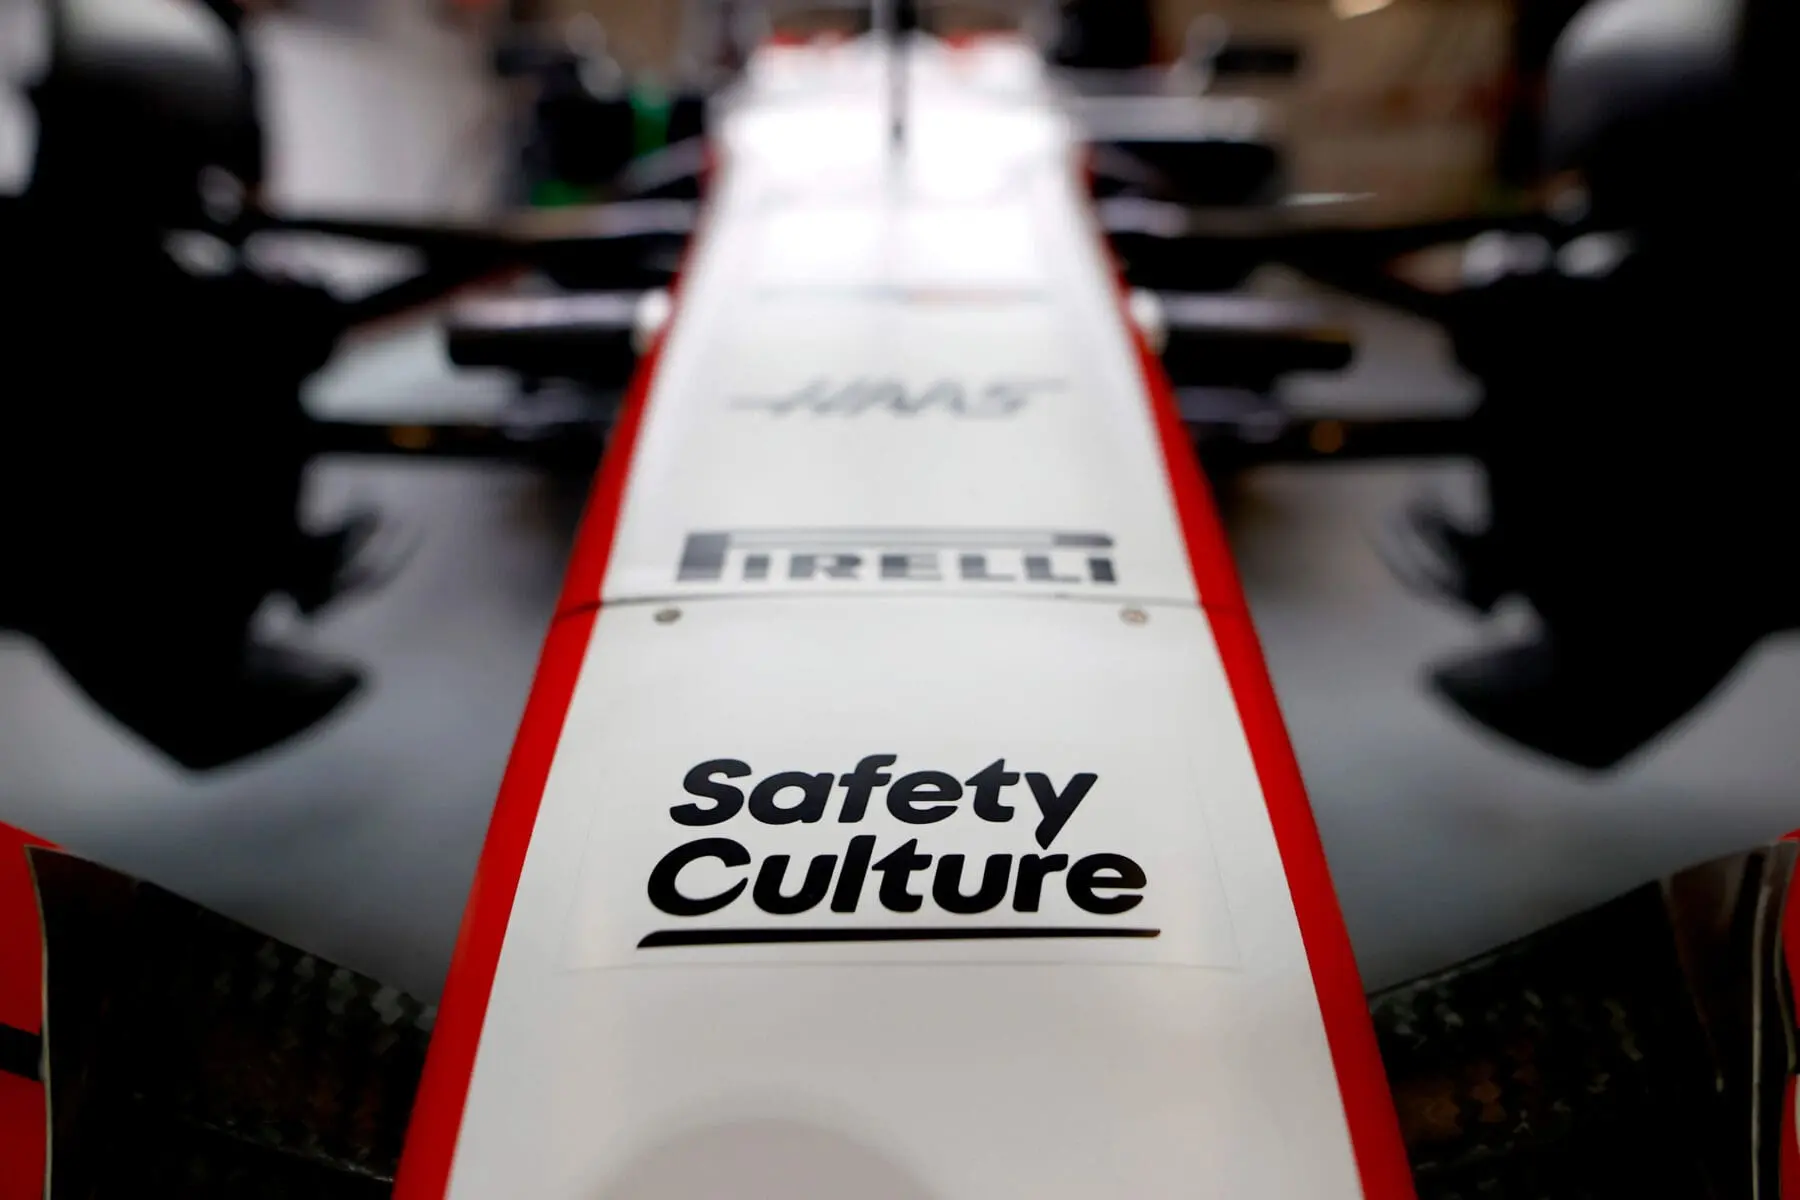 SafetyCulture on Haas vehicle